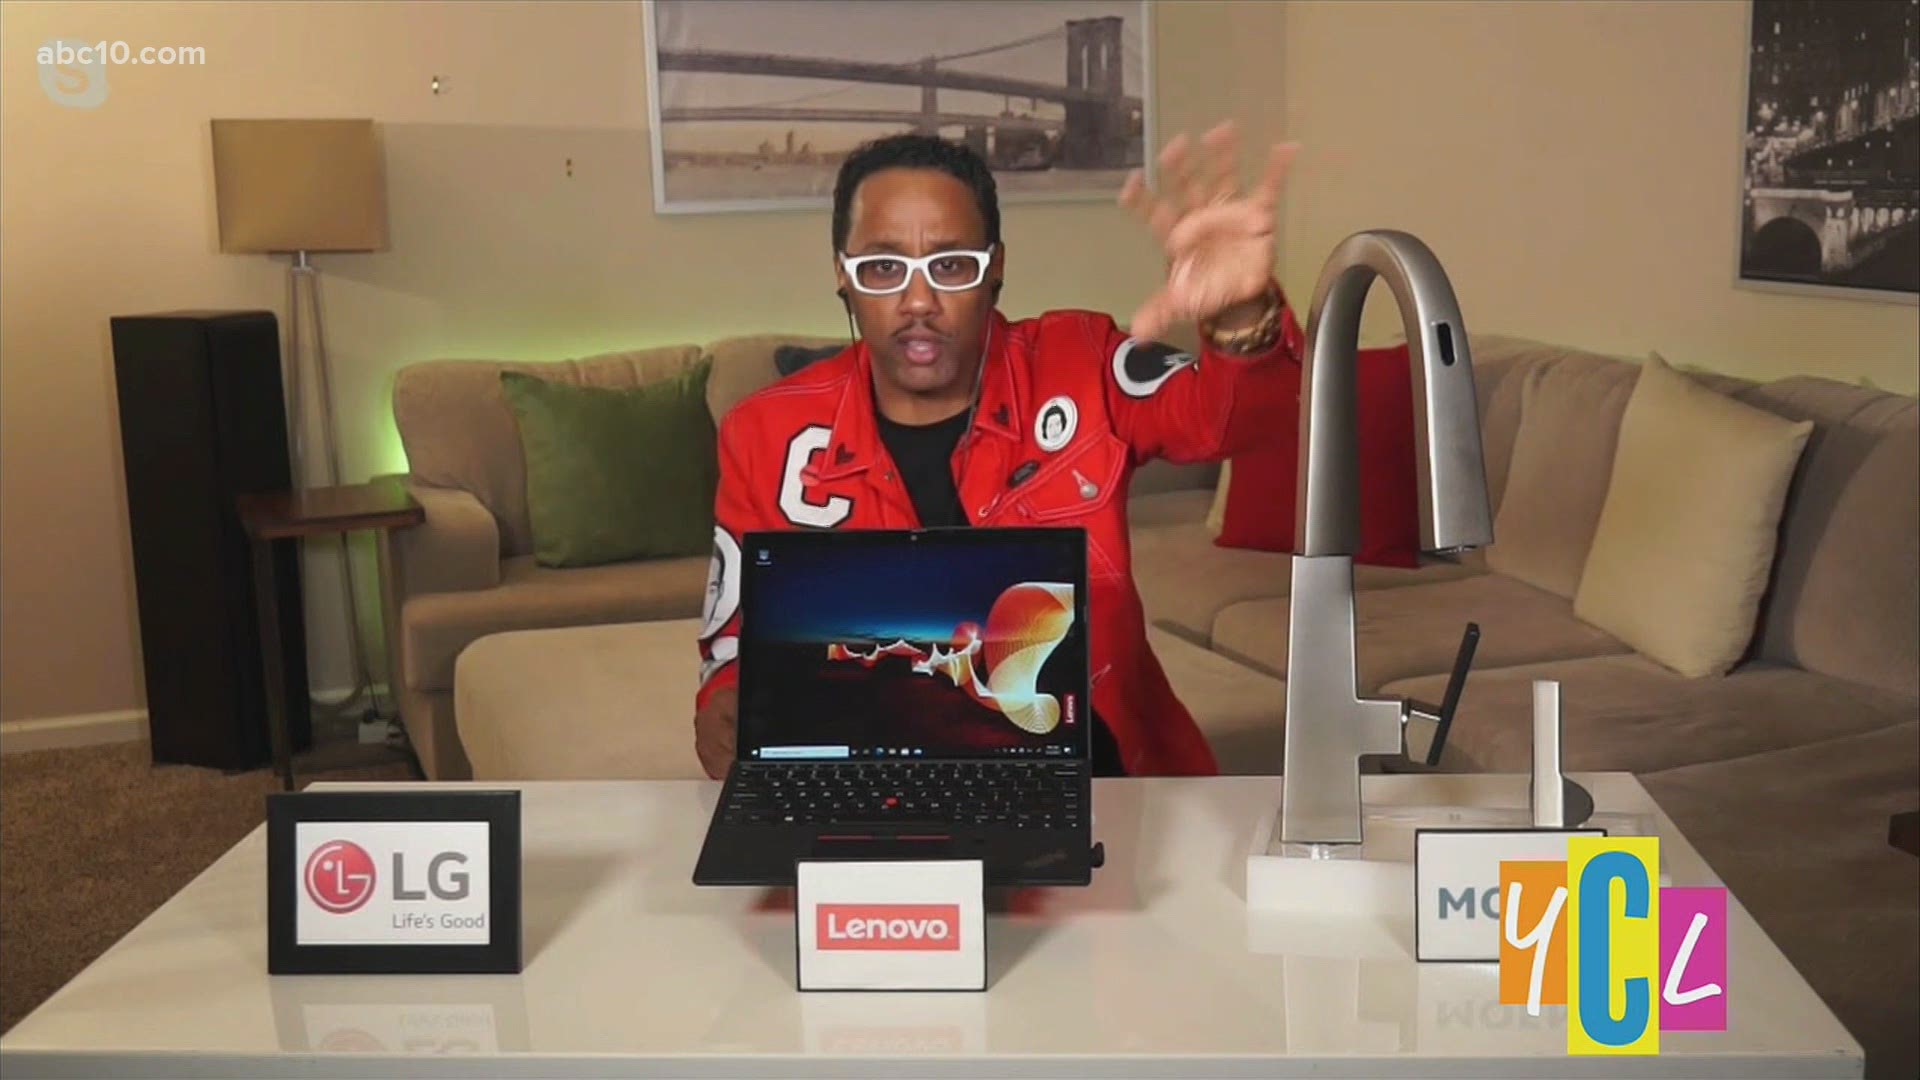 It’s opening day at CES and Mario Armstrong gives us an inside look on all of the latest tech gadgets from home entertainment, laptops and more!